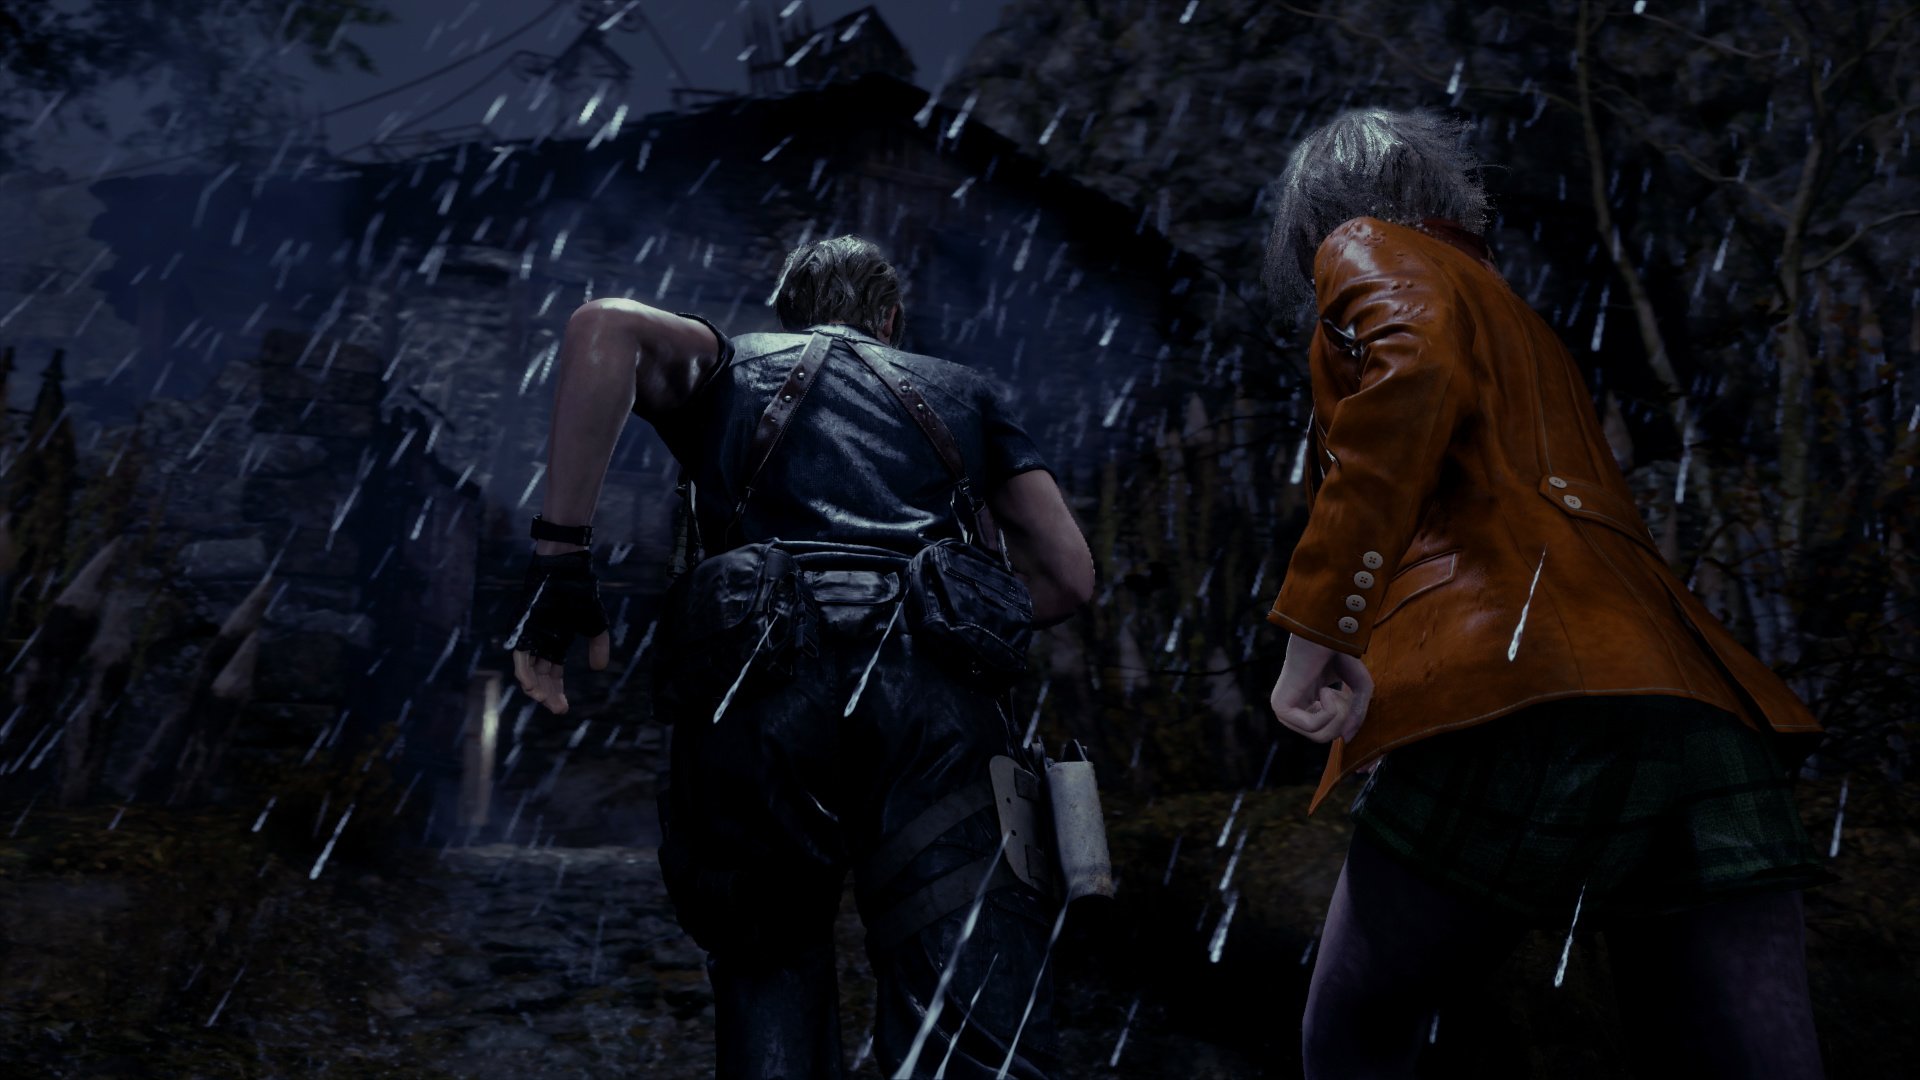 Resident Evil 4 Remake Preview: Hands-off with 10min of gameplay